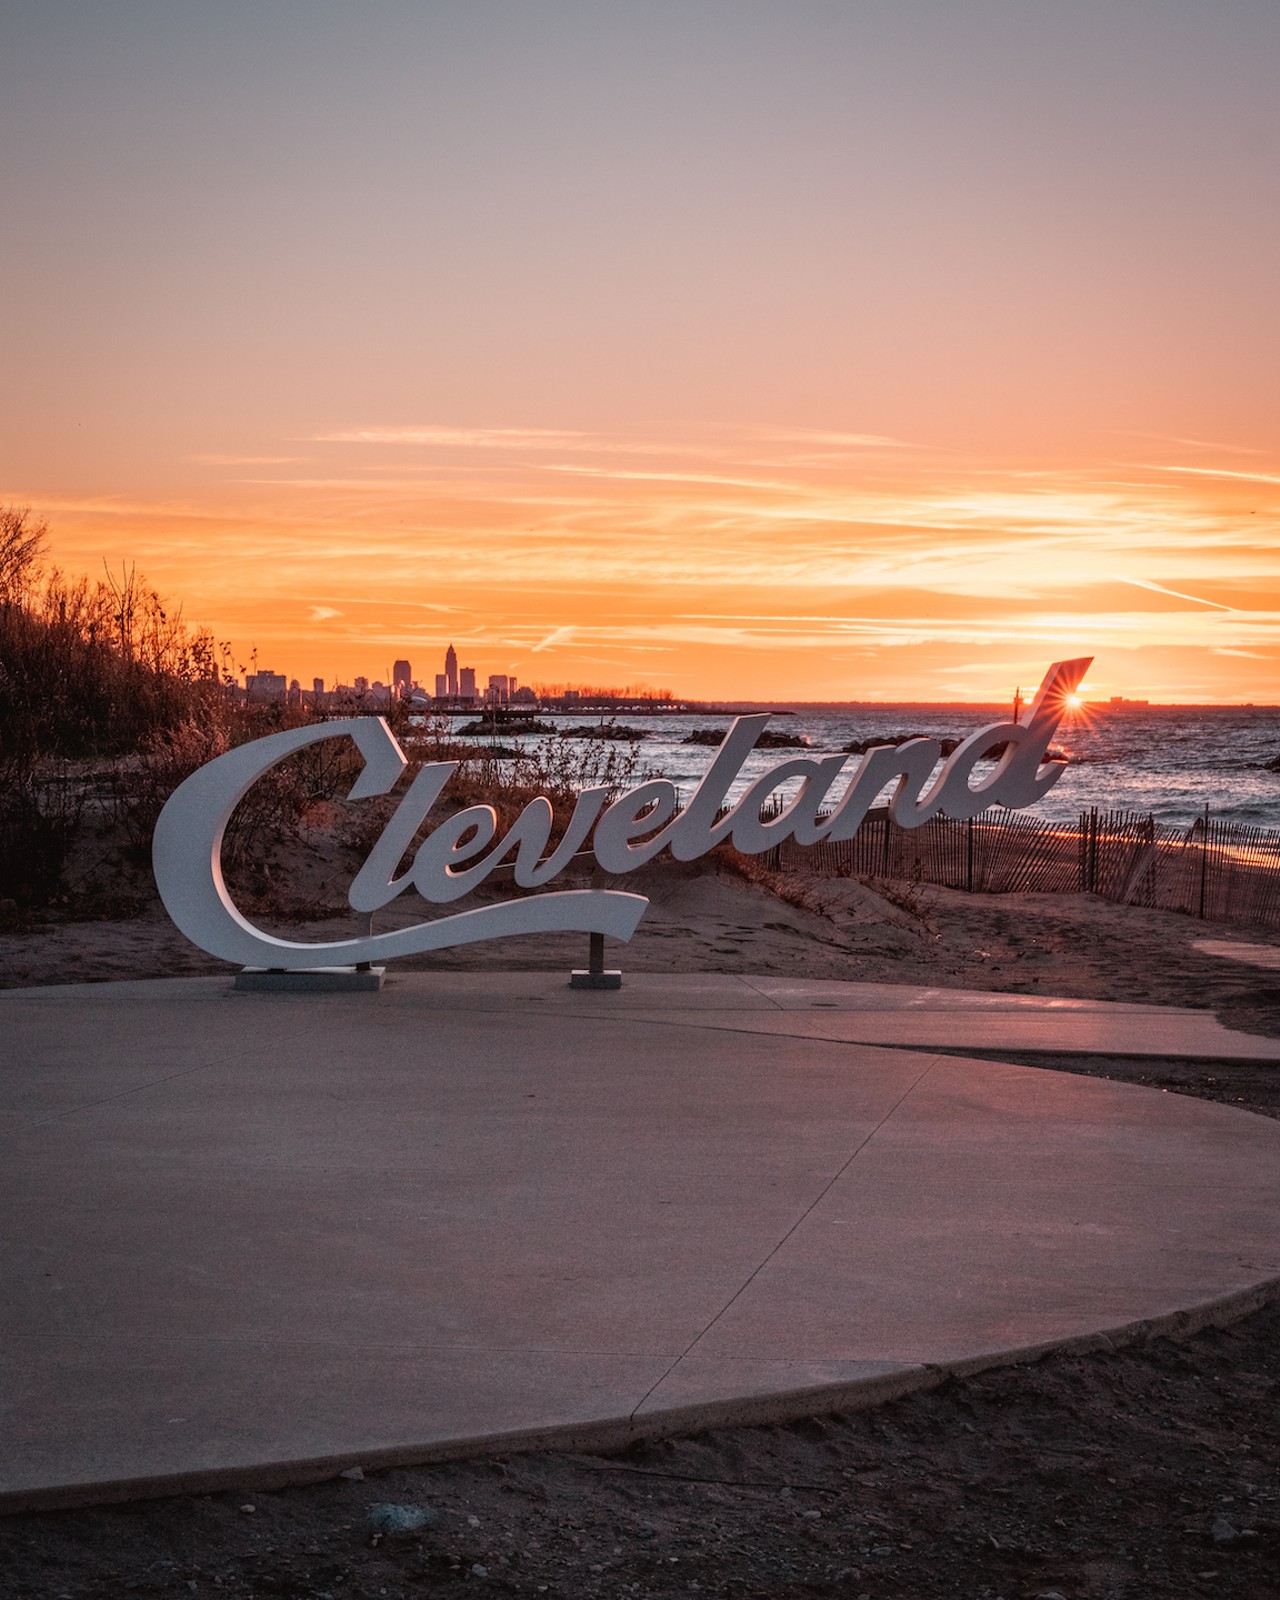 Euclid Beach: Cleveland’s West Side often gets the love for having spectacular sight lines of the skyline, but Euclid Beach holds its own as a spot to add to your picture-taking list. Whether it’s taking in a sunset behind Cleveland’s skyline or grabbing a shot at one of Cleveland’s landmark script signs, Euclid Beach is the perfect stop for any east side adventure.